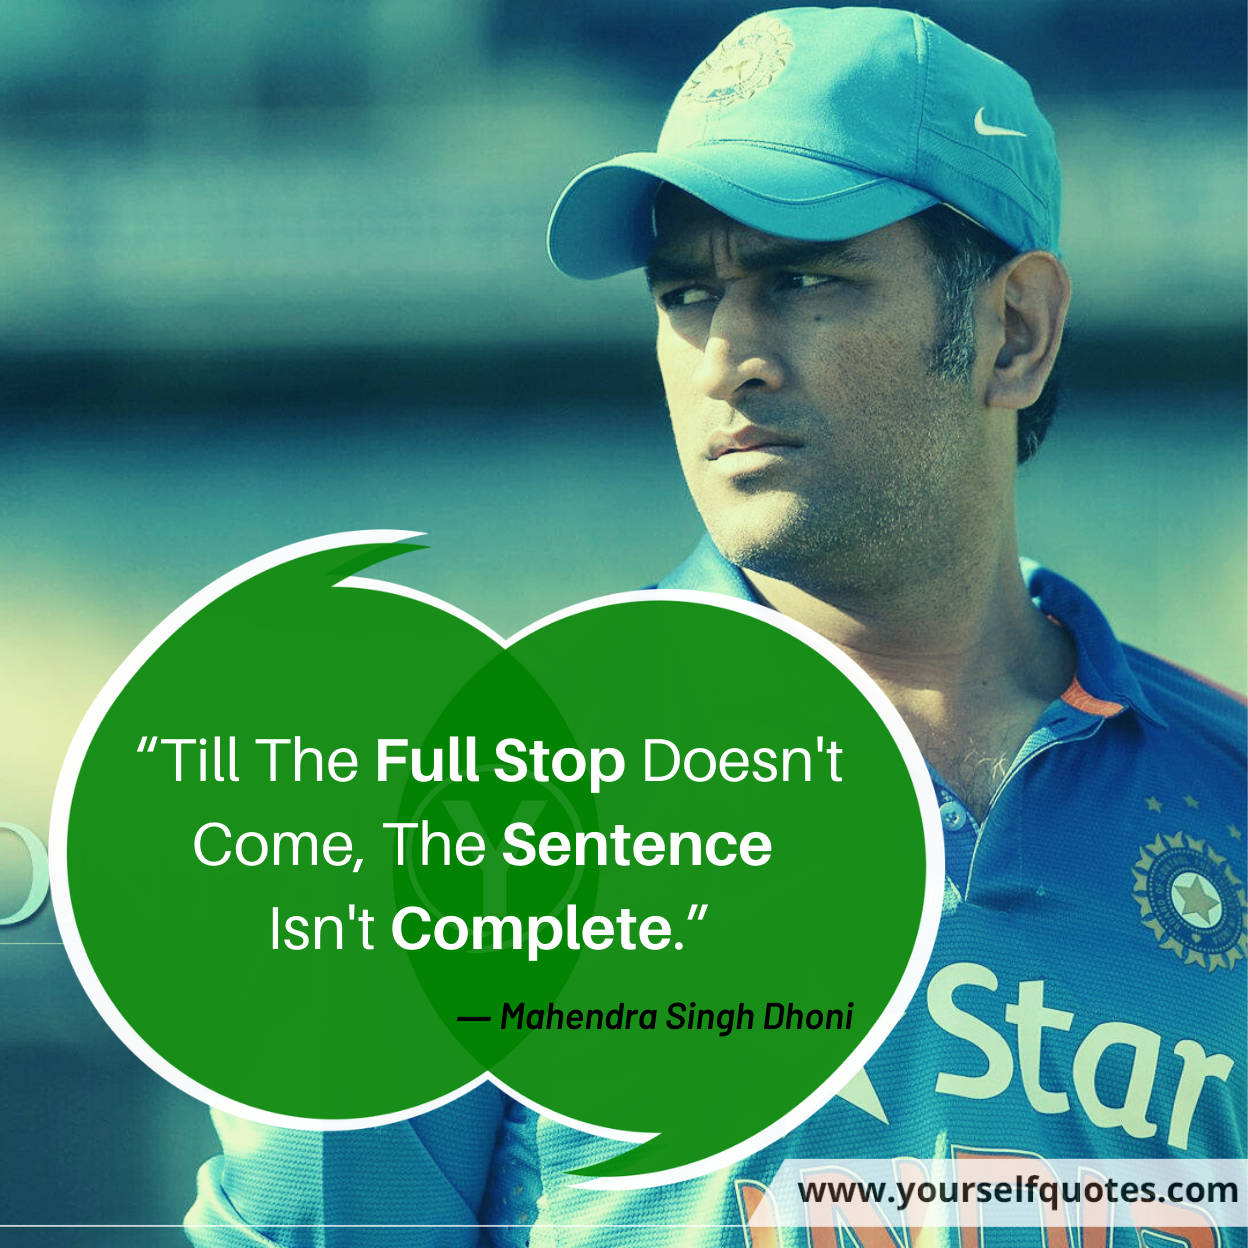 Quotes Dhoni Images